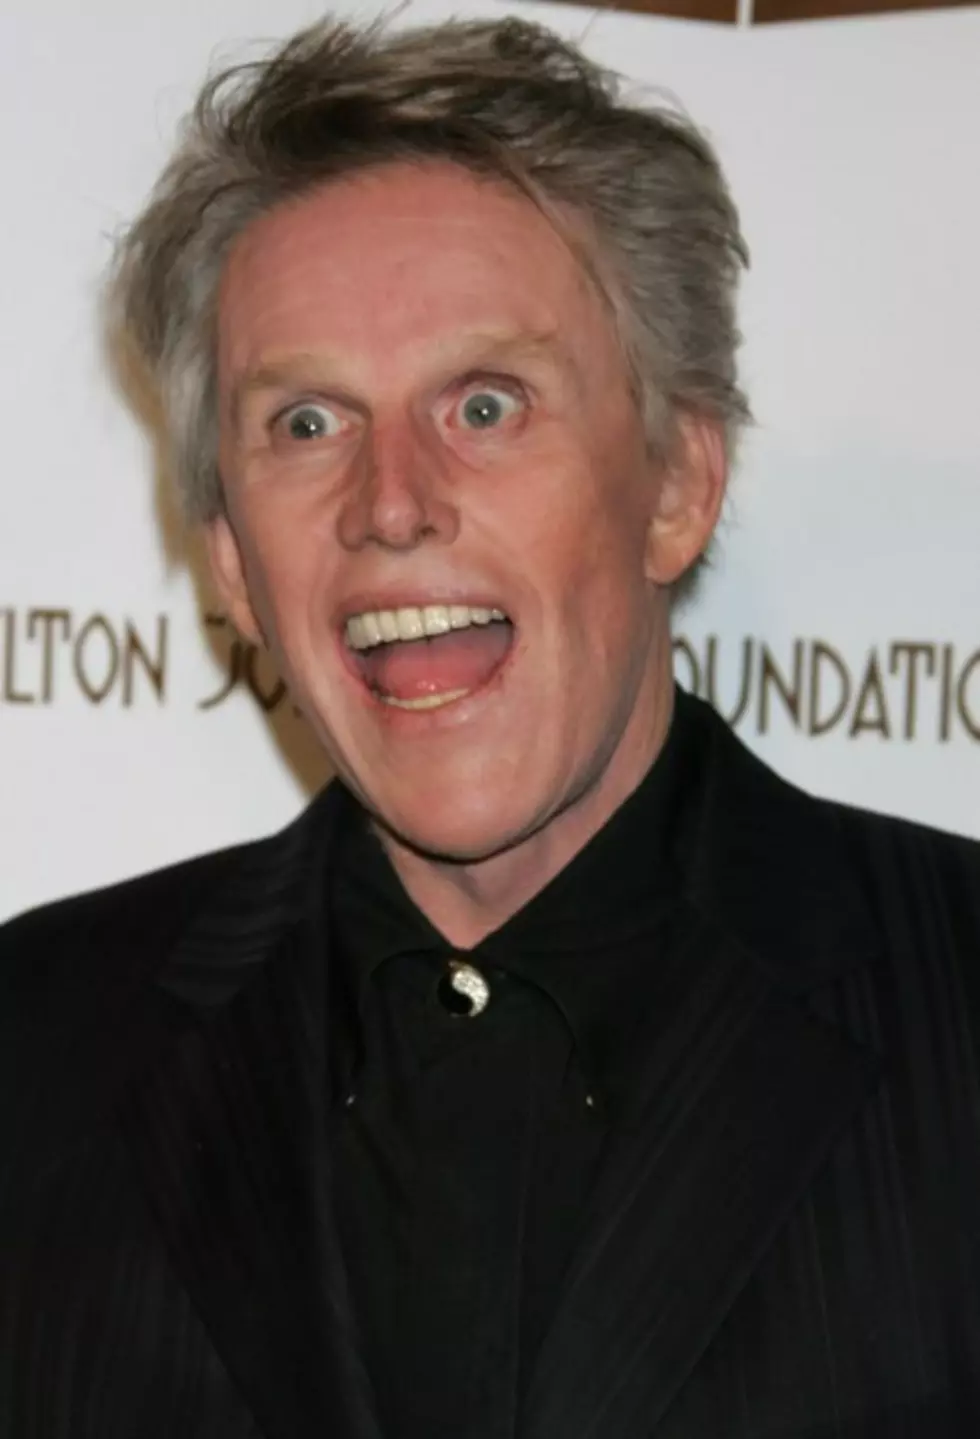 Gary Busey Fortune Cookies?